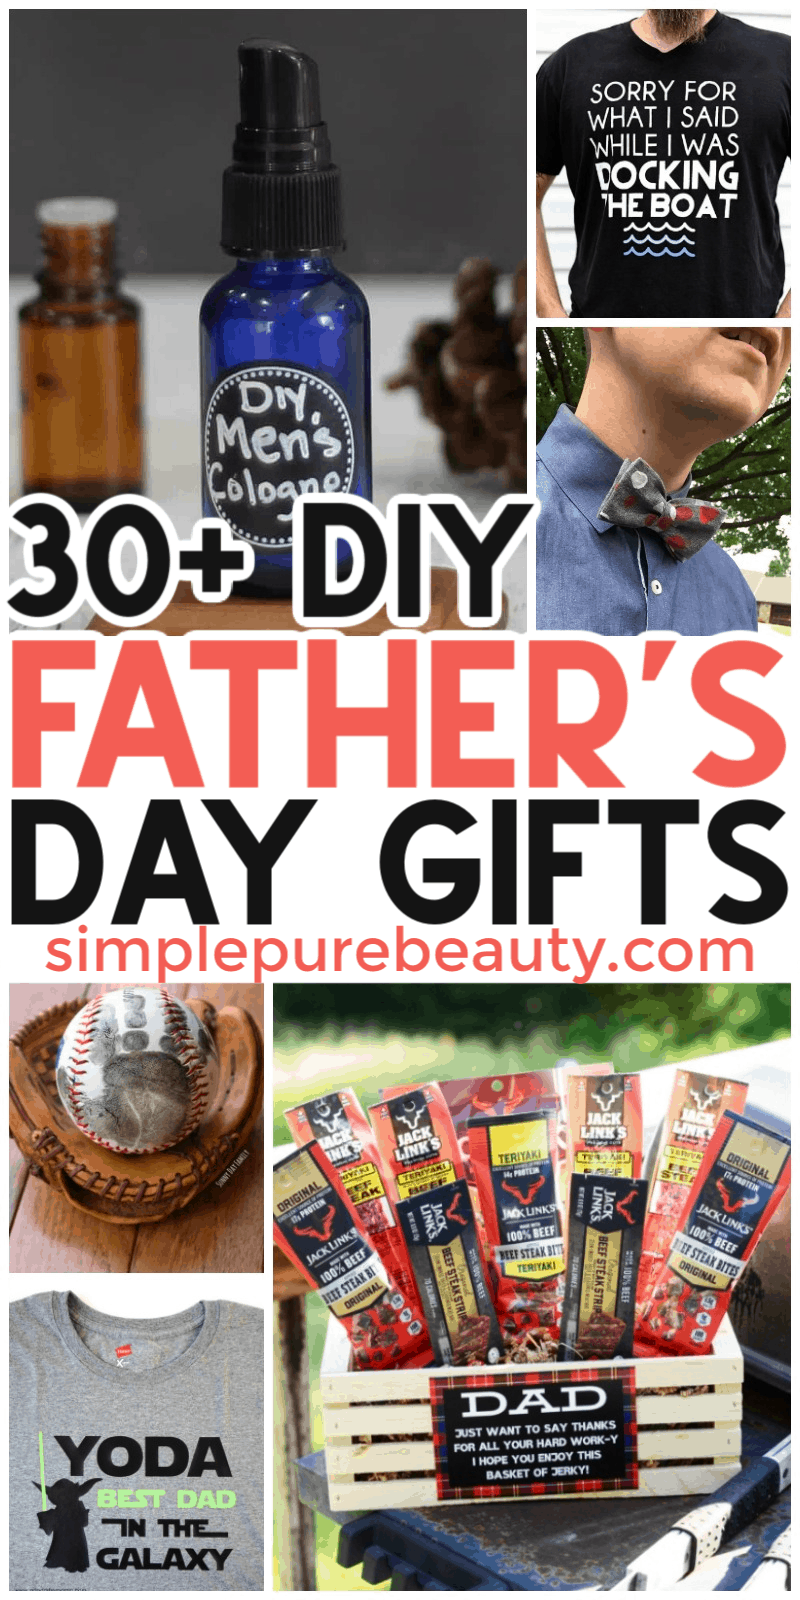 30 Father's Day Gifts He'll Love - Simple Pure Beauty
